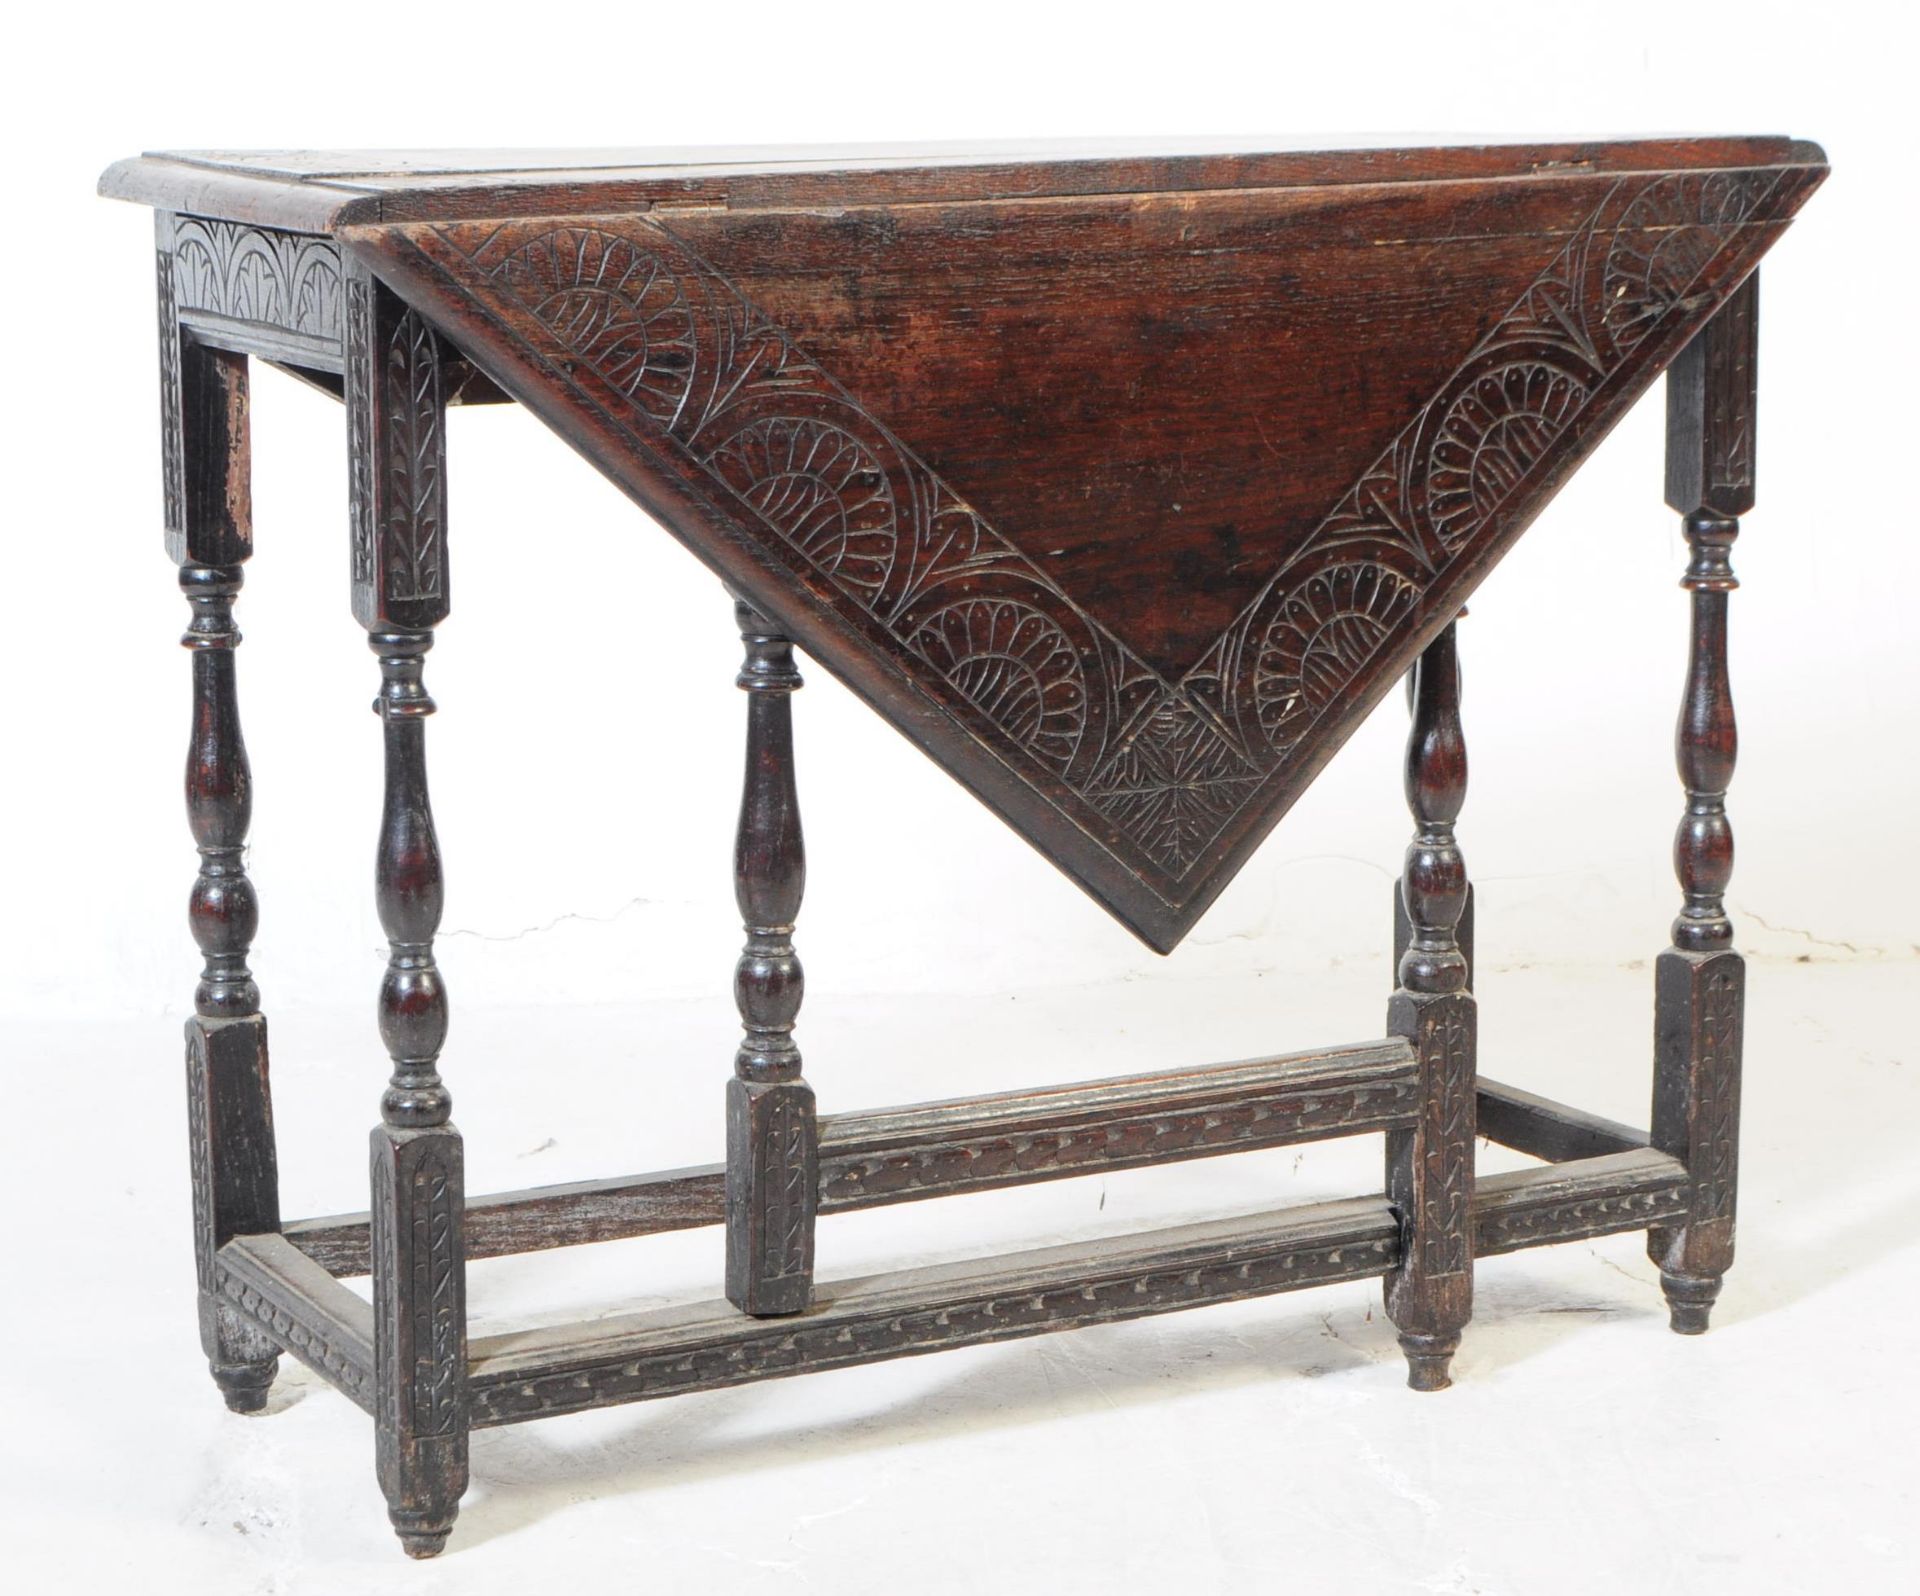 19TH CENTURY VICTORIAN CARVED OAK TOP DROP LEAF TABLE